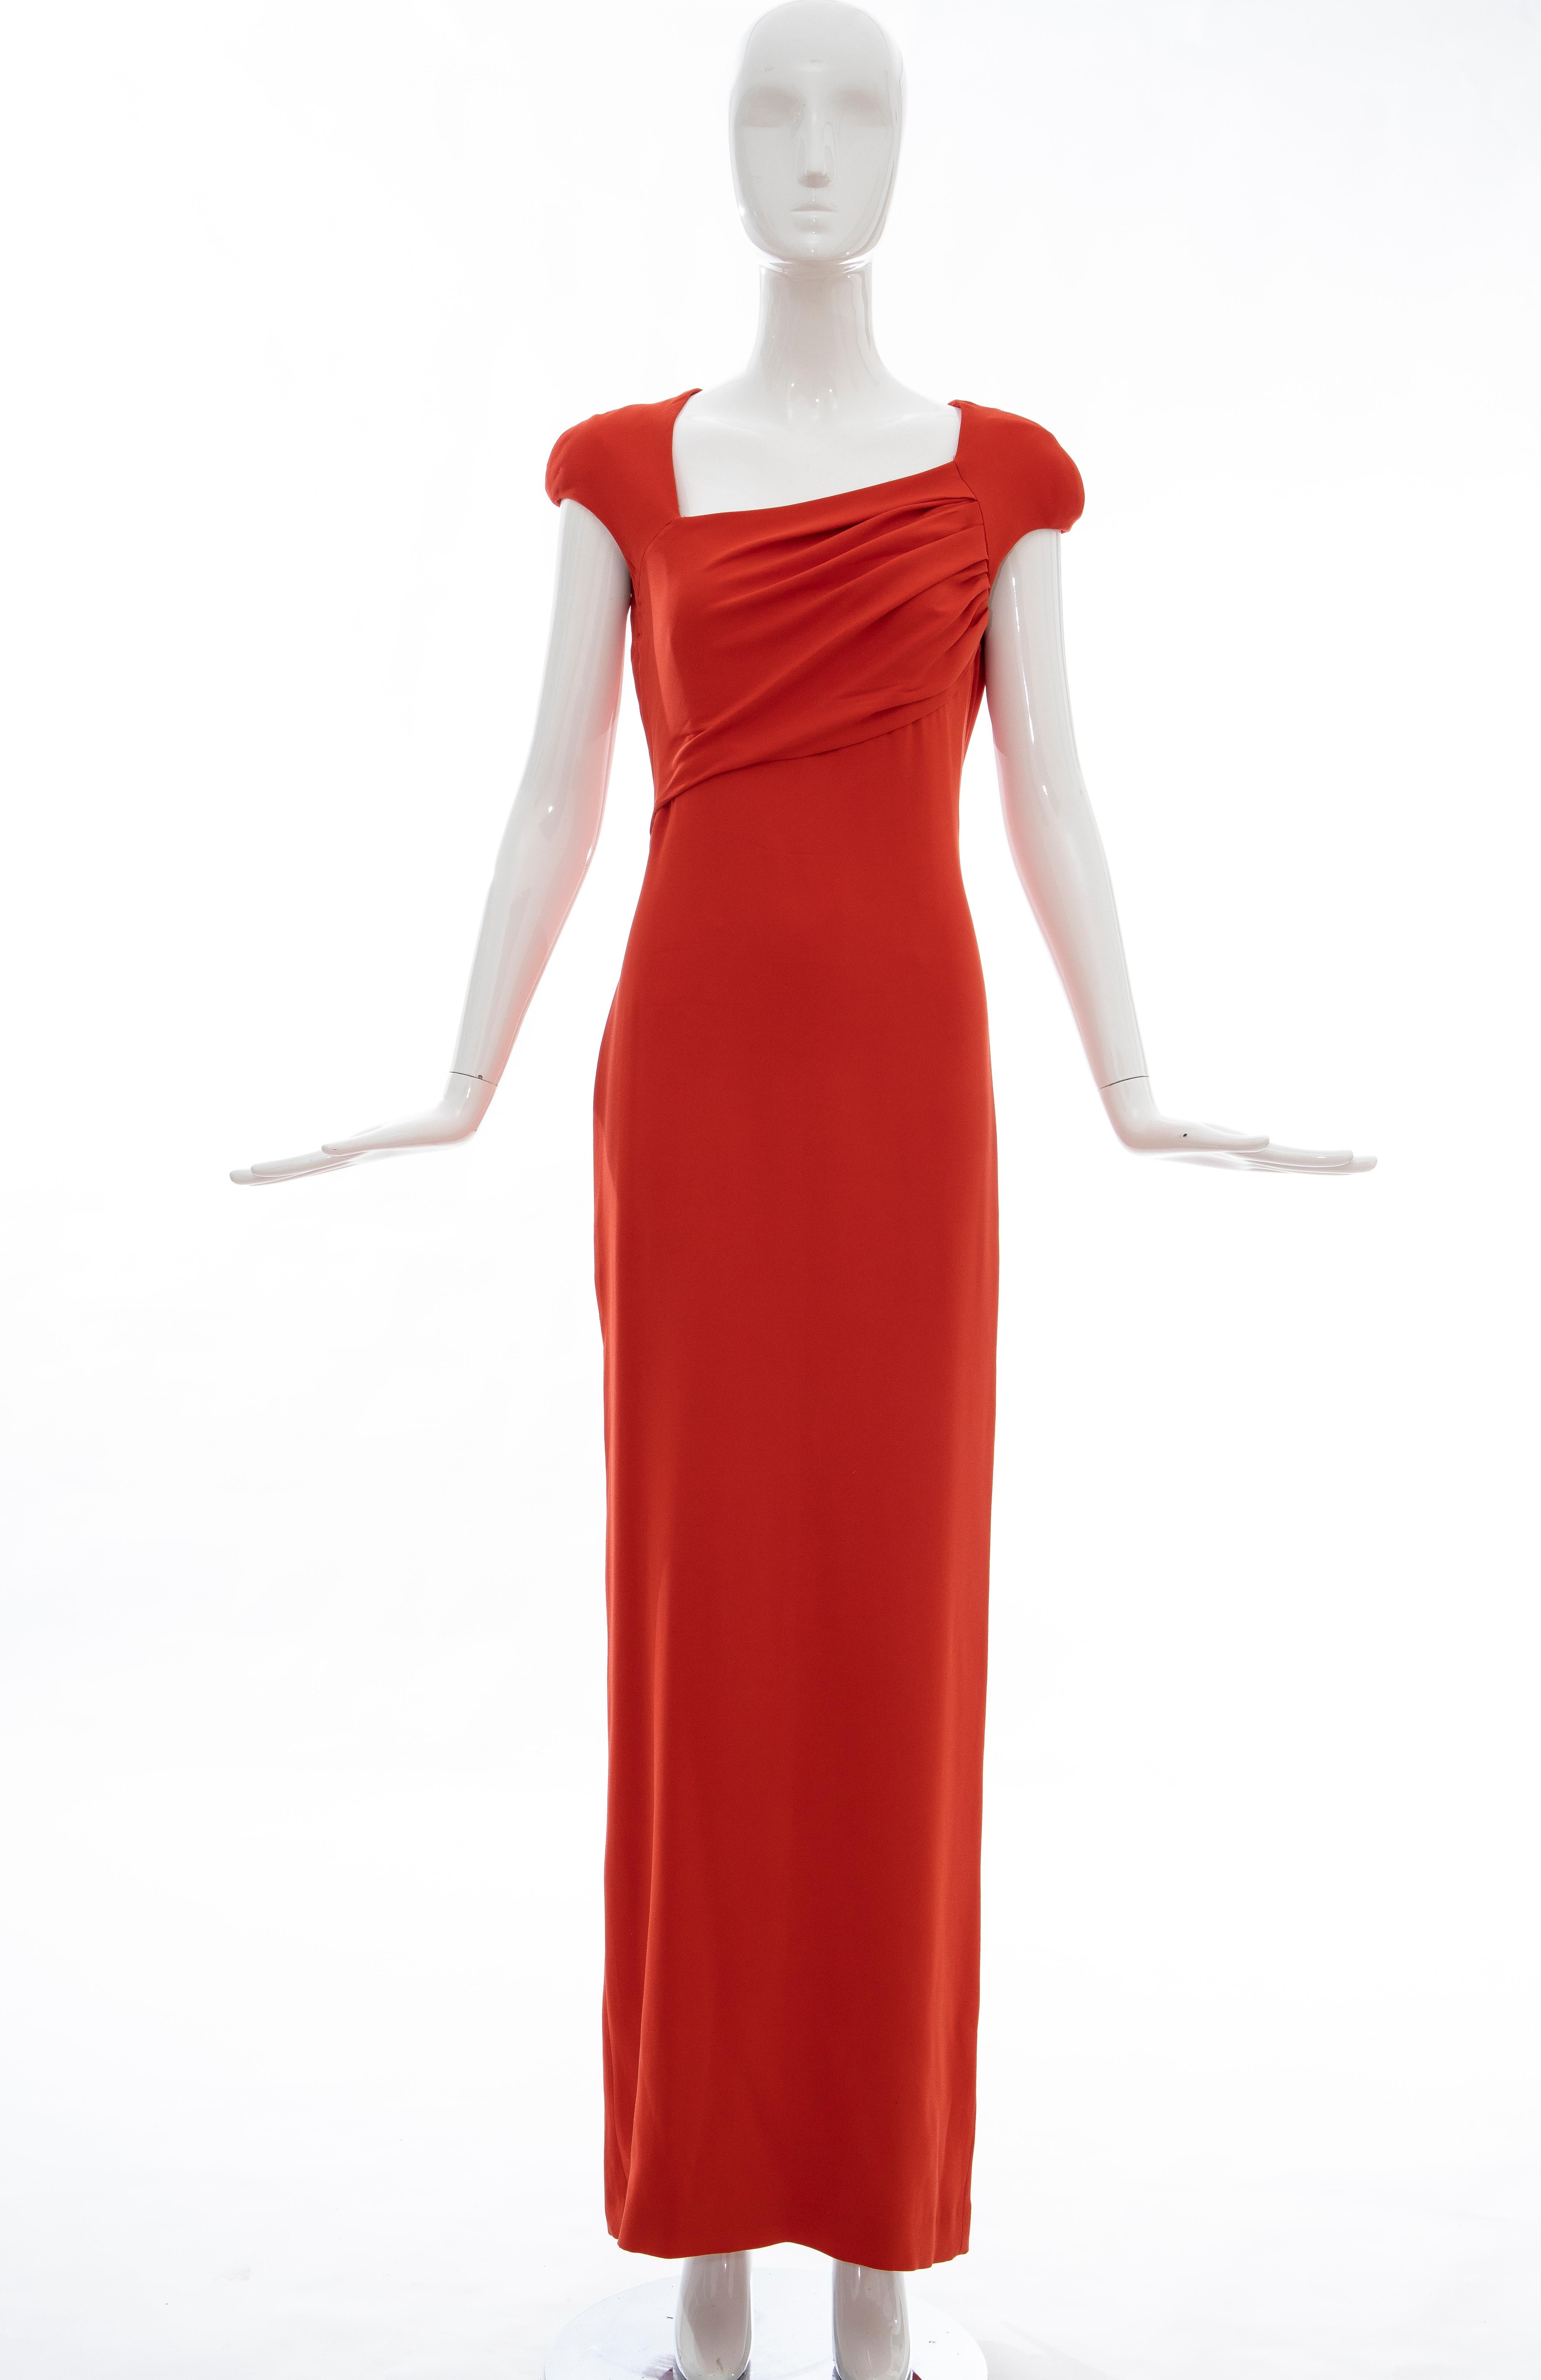 Tom Ford Runway Silk Persimmon Evening Dress With Cape, Fall 2012 6